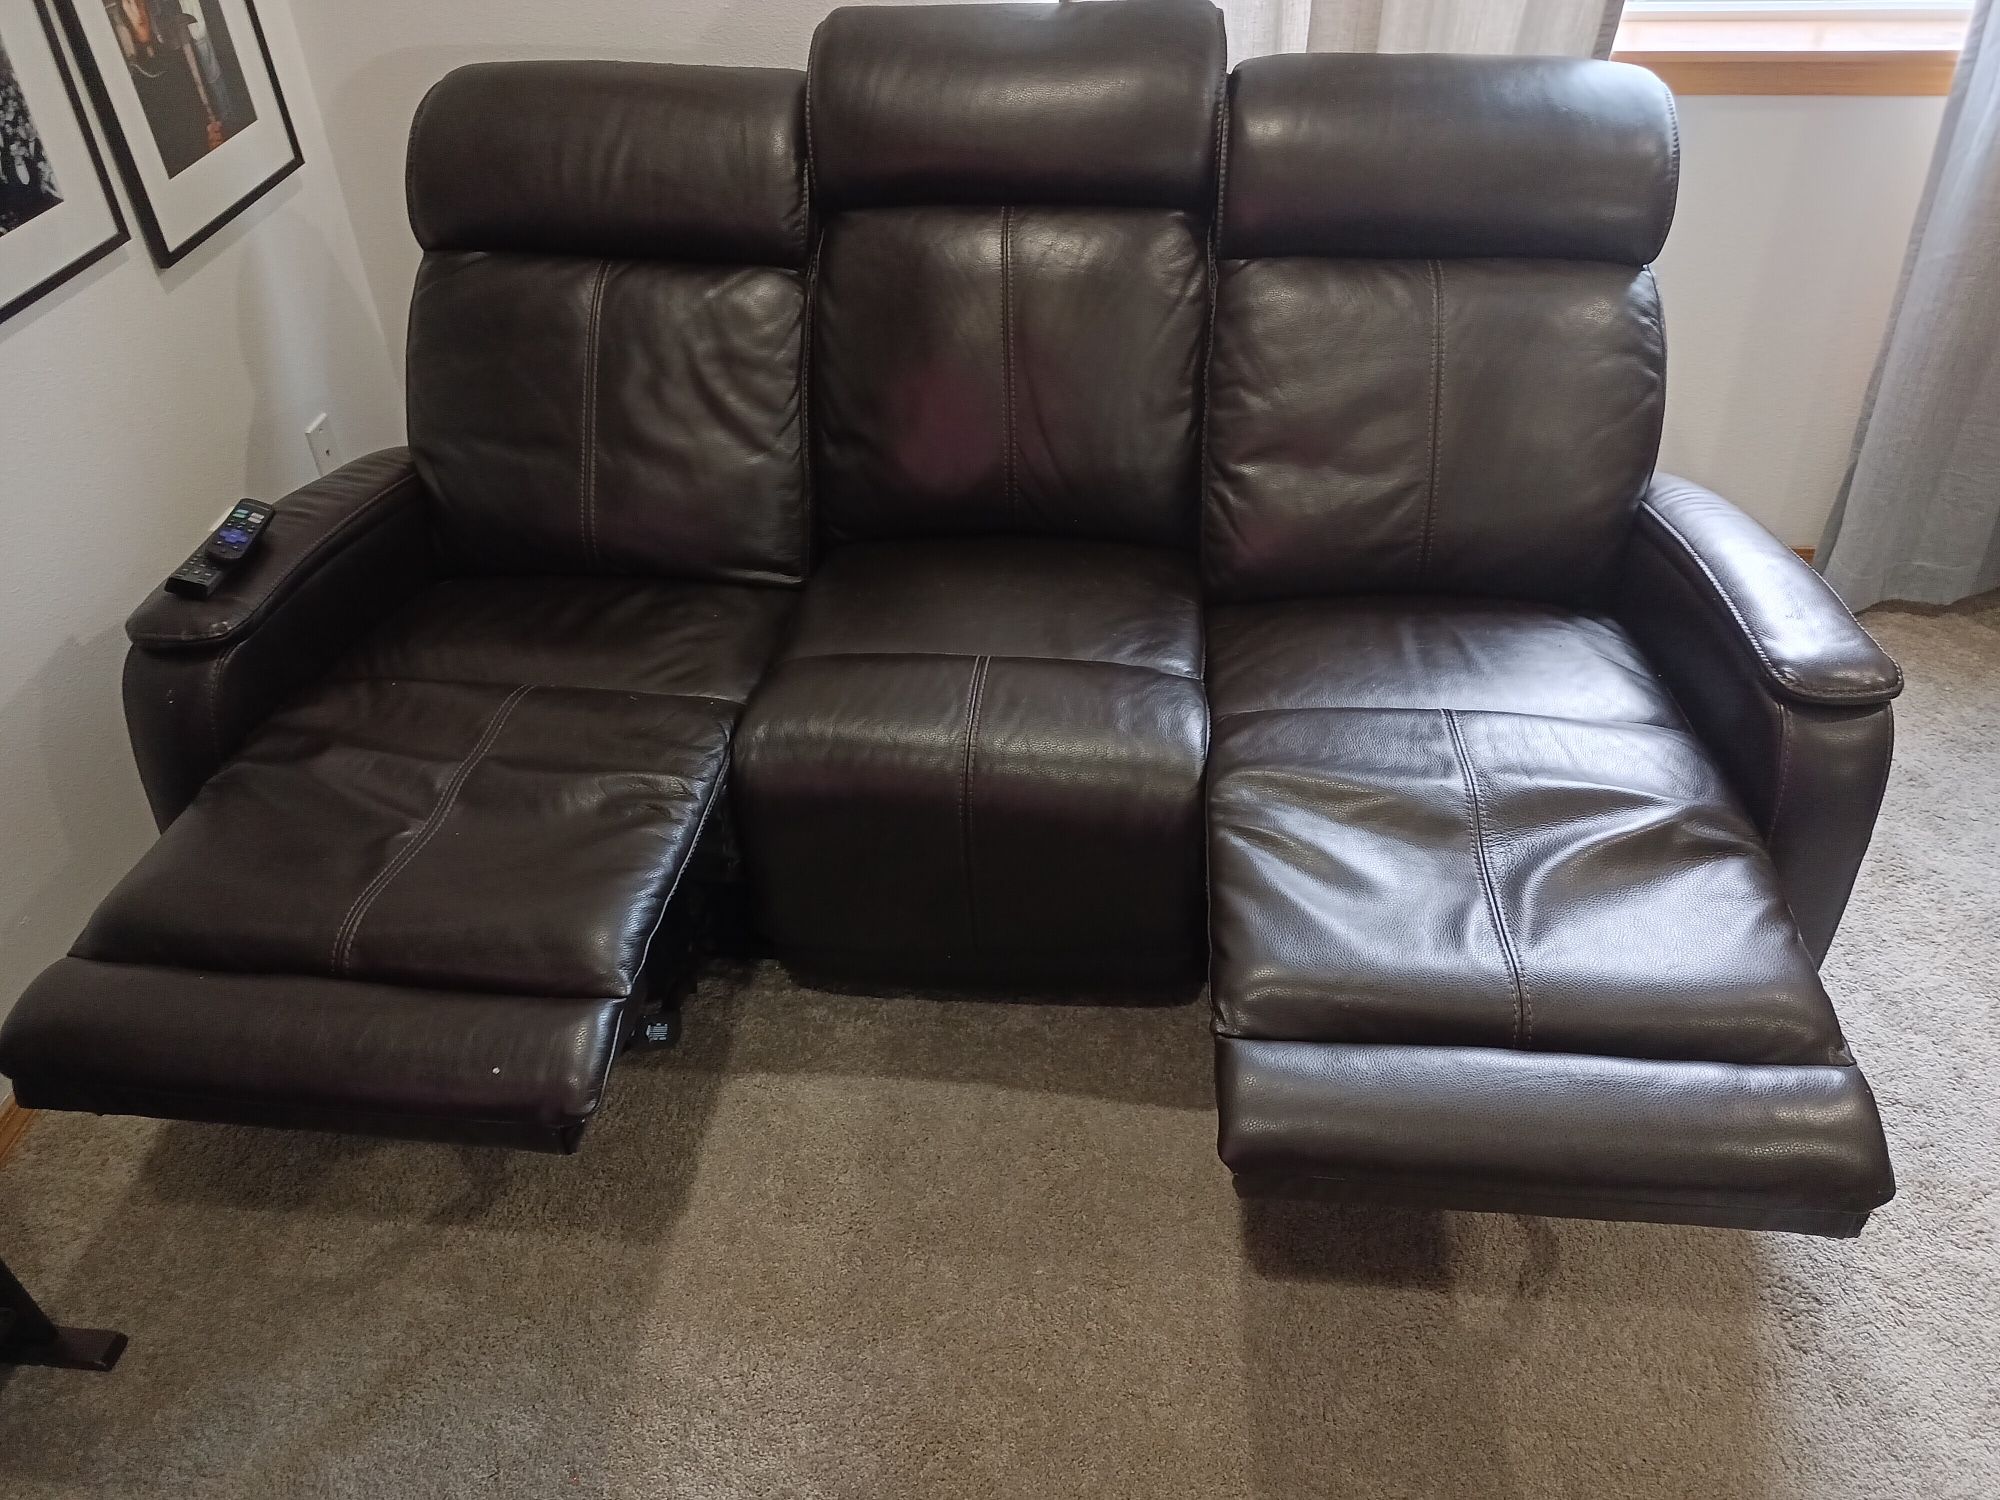 Genuine Leather Chocolate Brown Sofa, Love Seat And  Recliner REDUCED PRICE